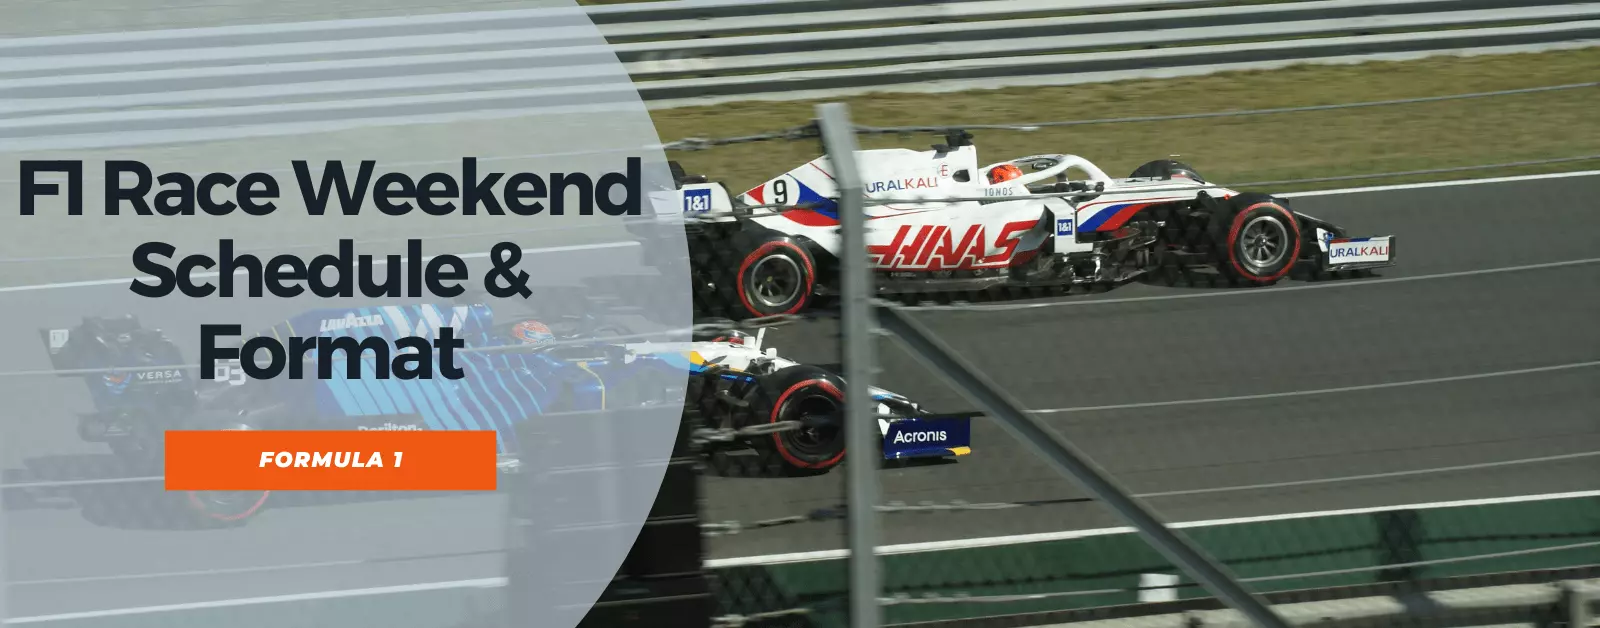 F1 Race Weekend Schedule & Format Into Turn One